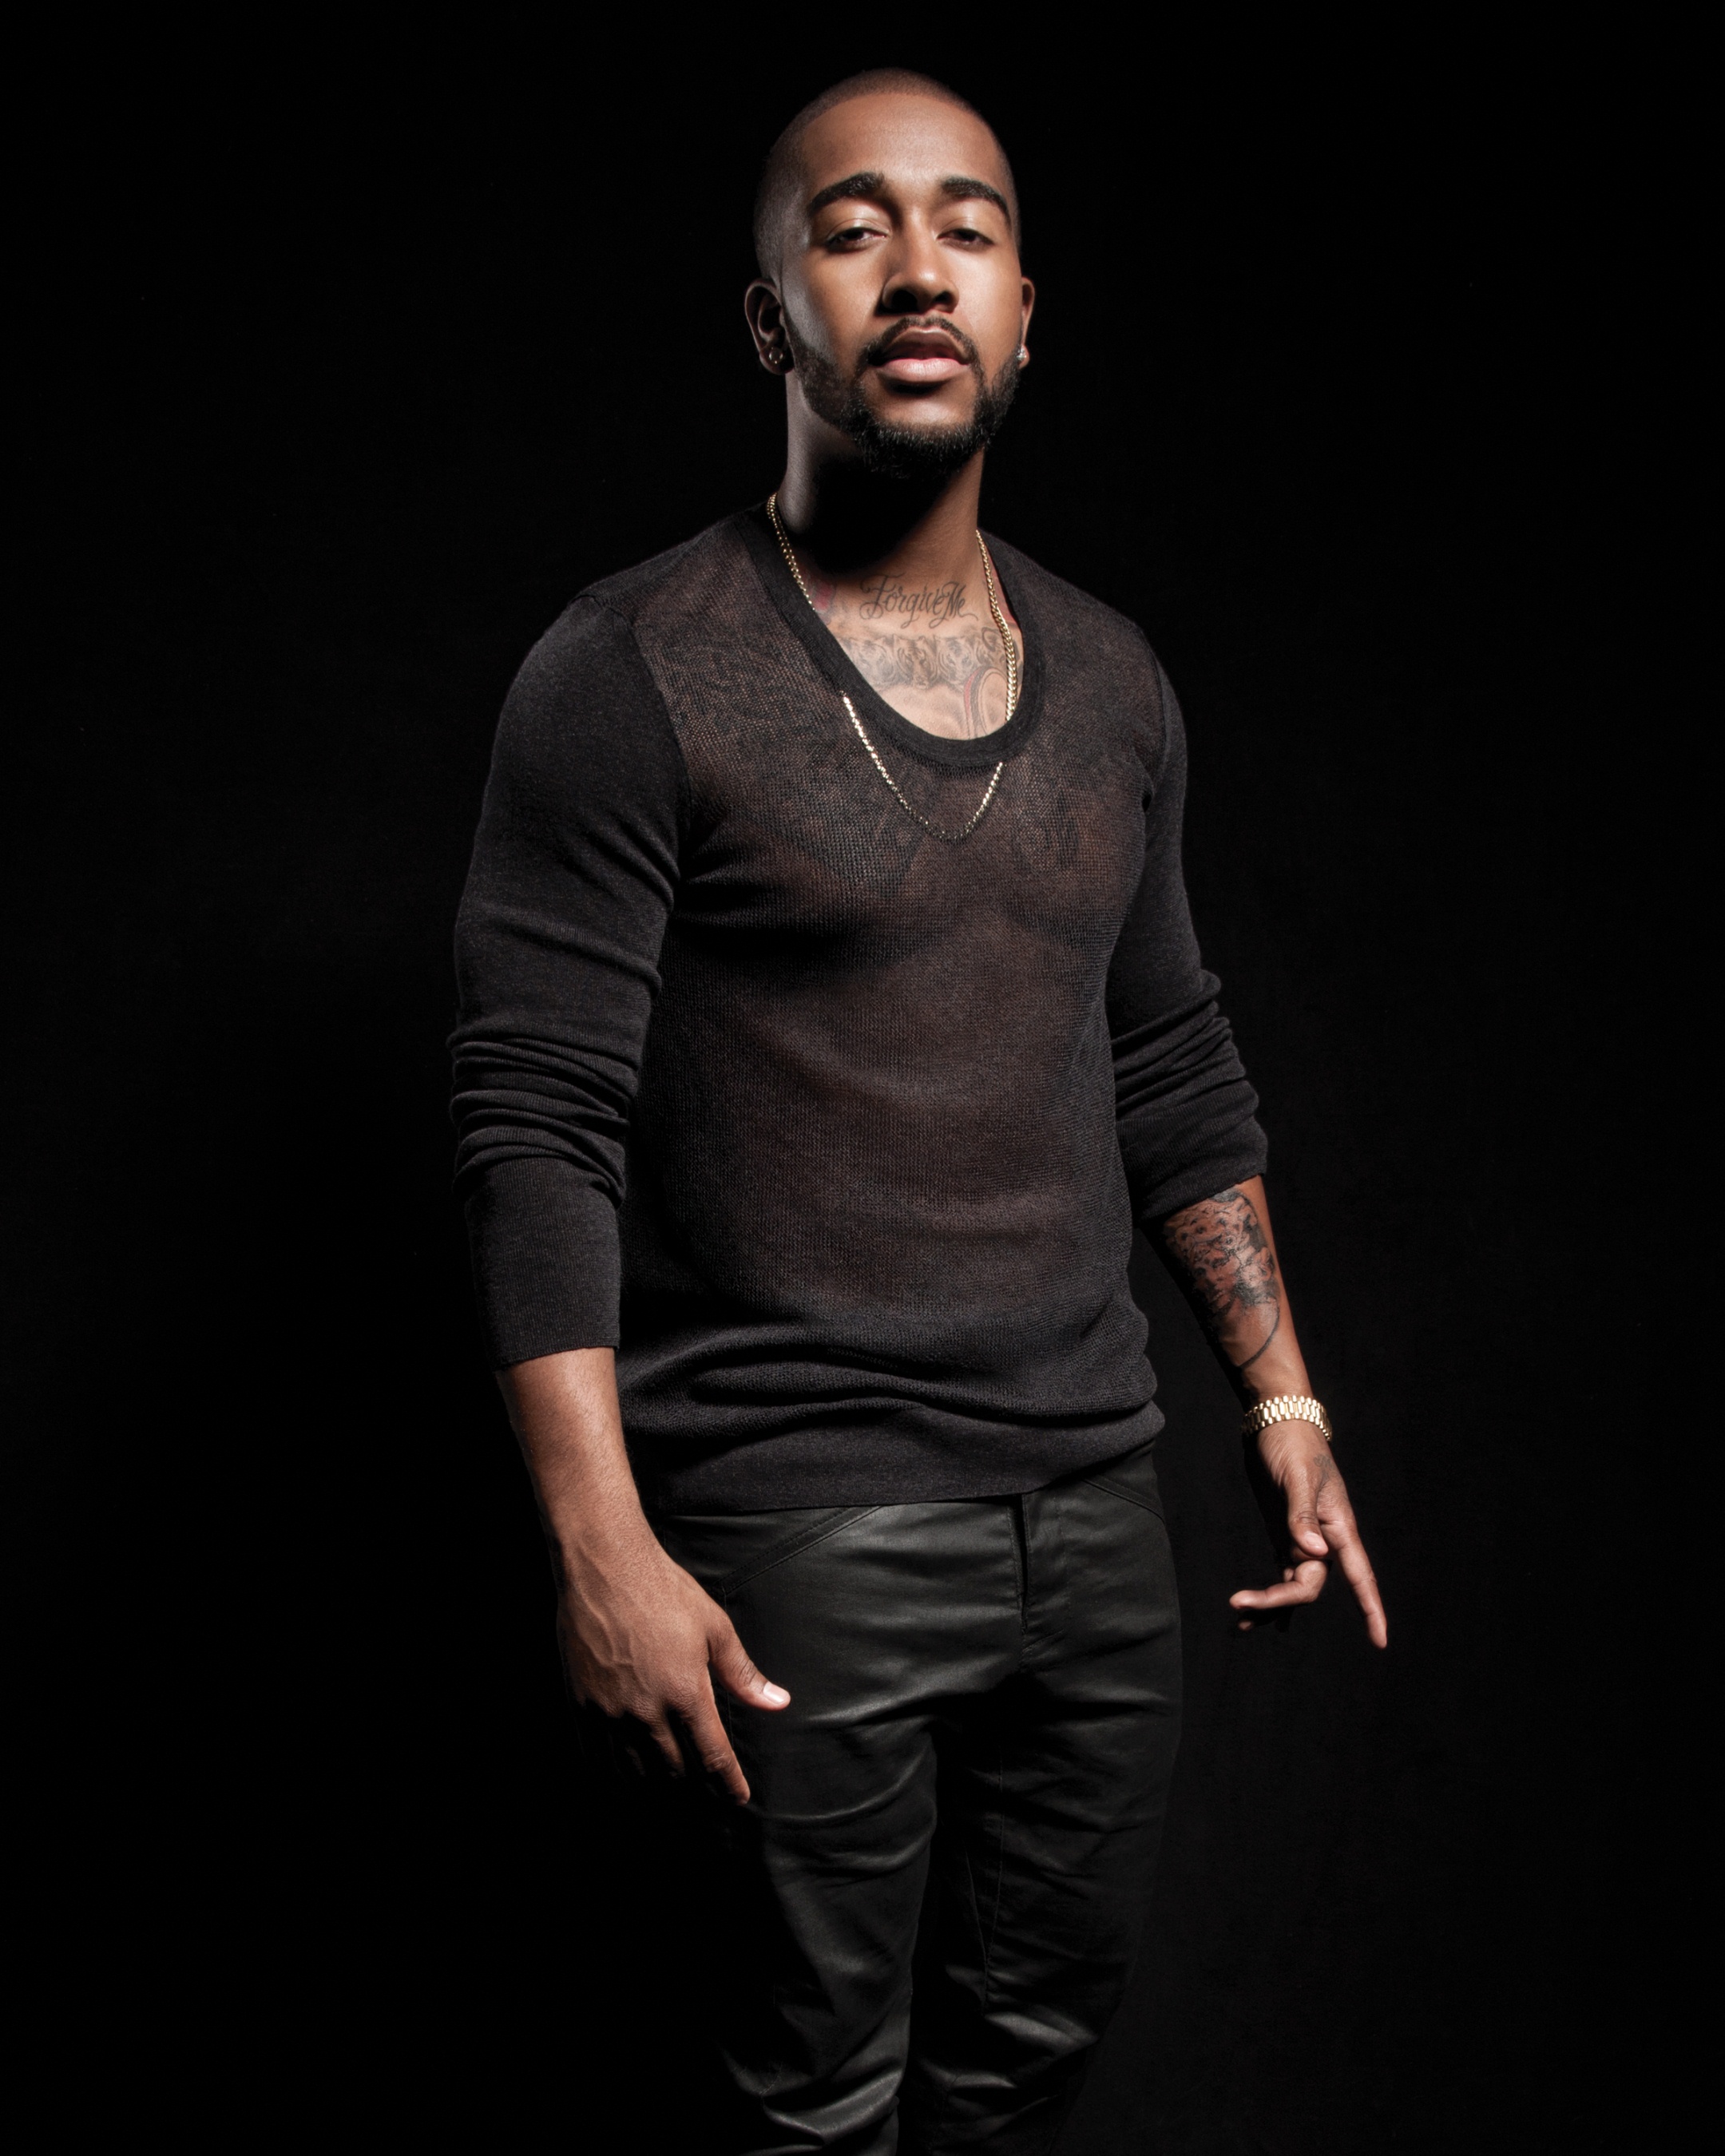 Omarion Wallpapers.